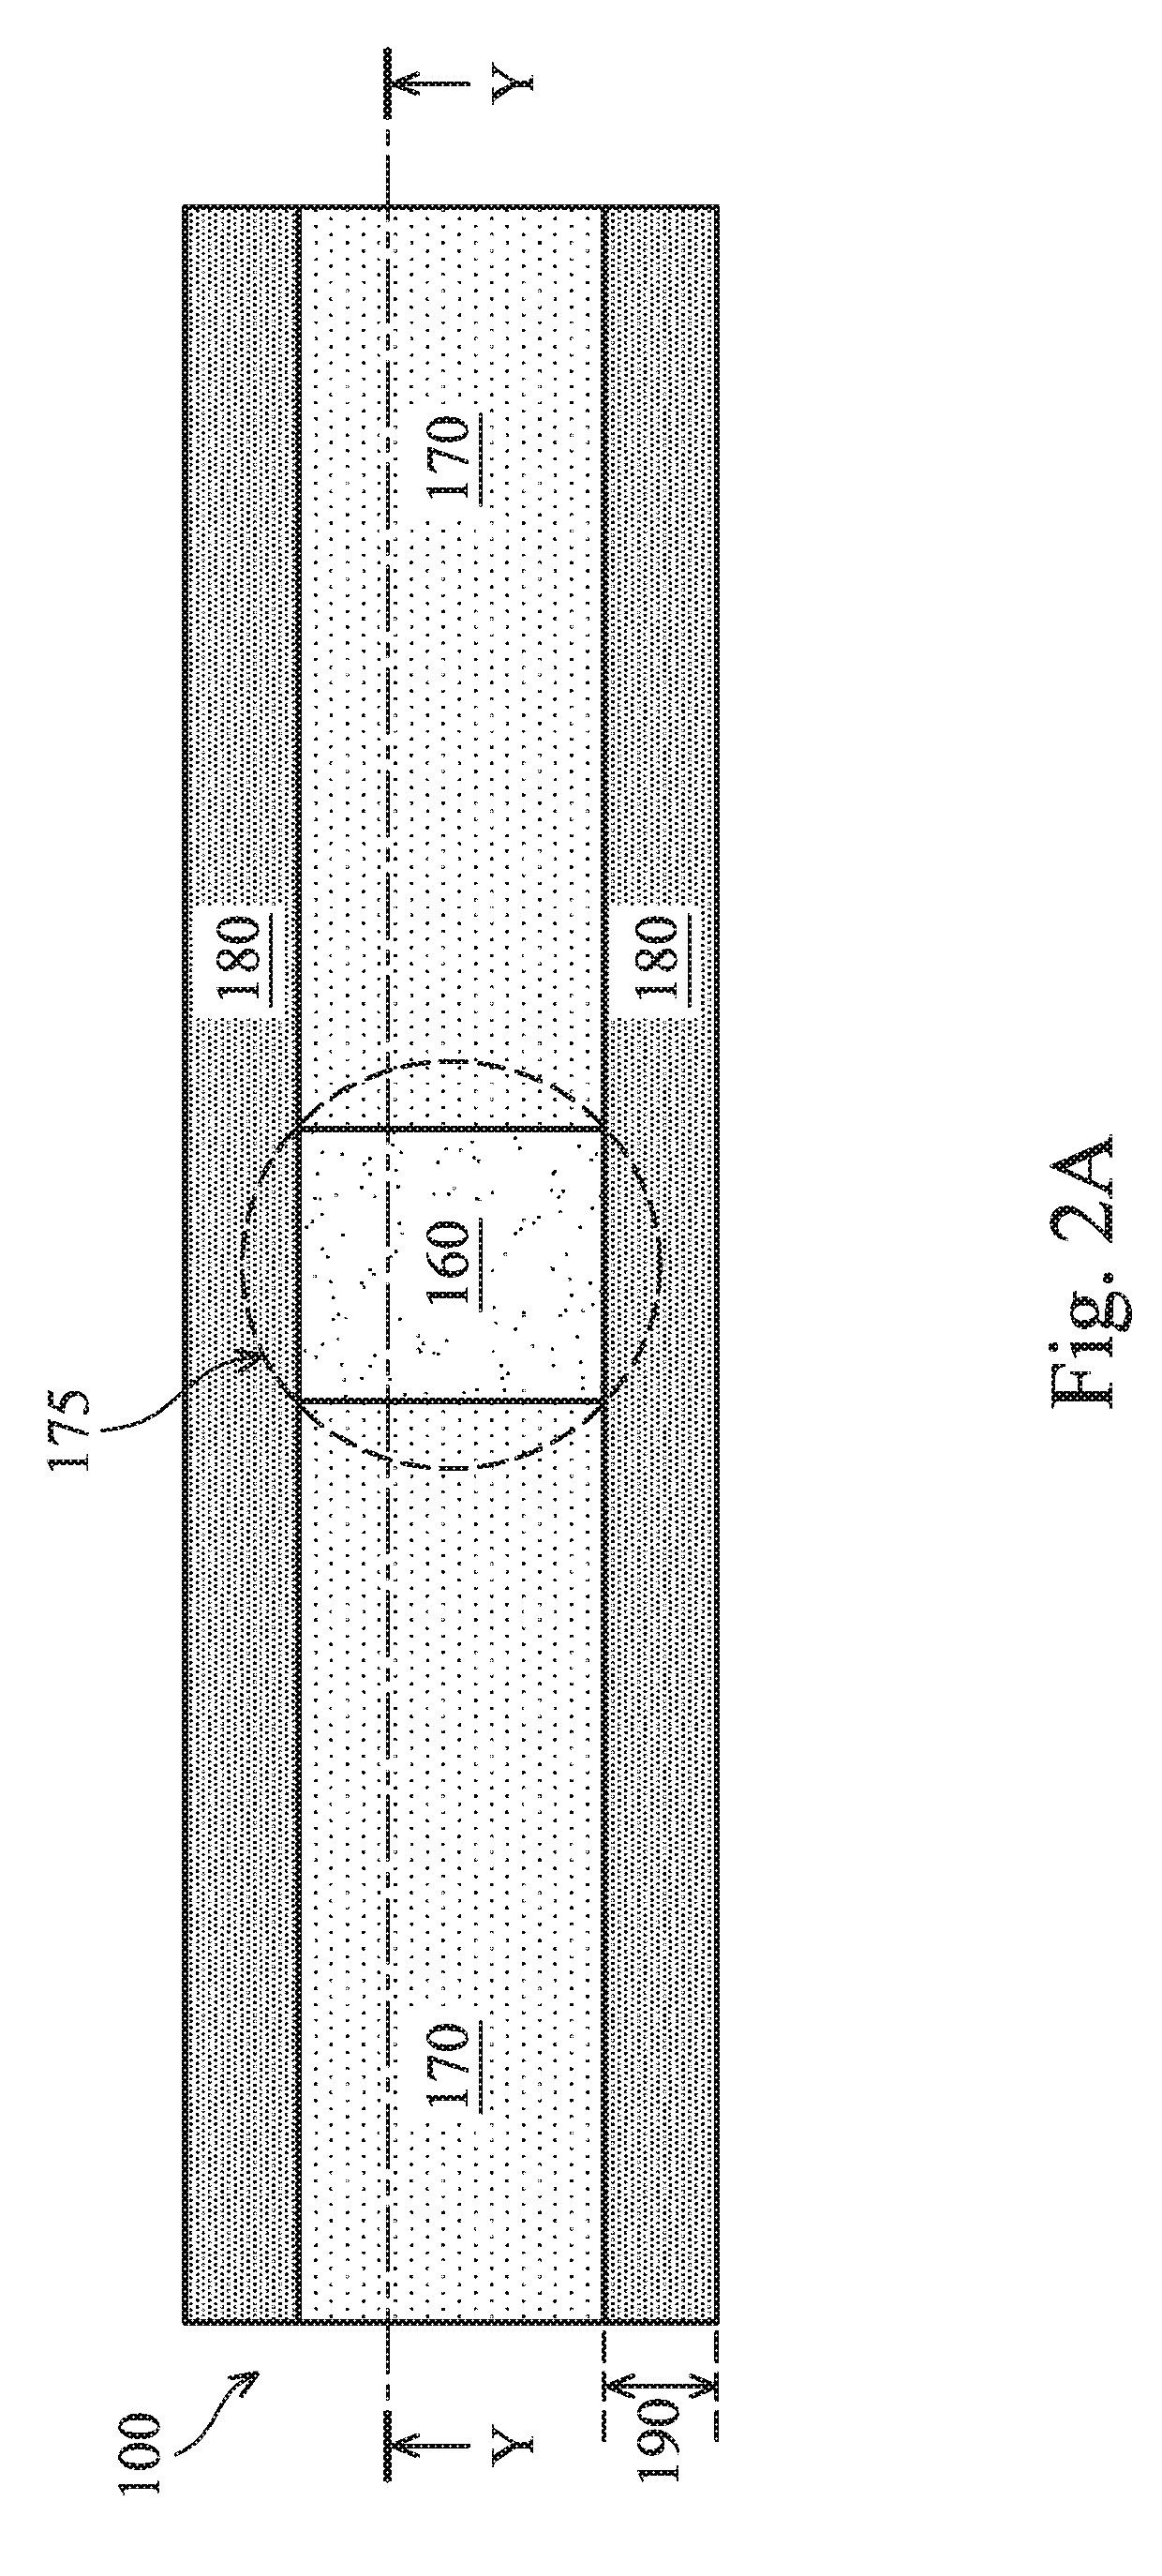 FinFET Devices with Embedded Air Gaps and the Fabrication Thereof